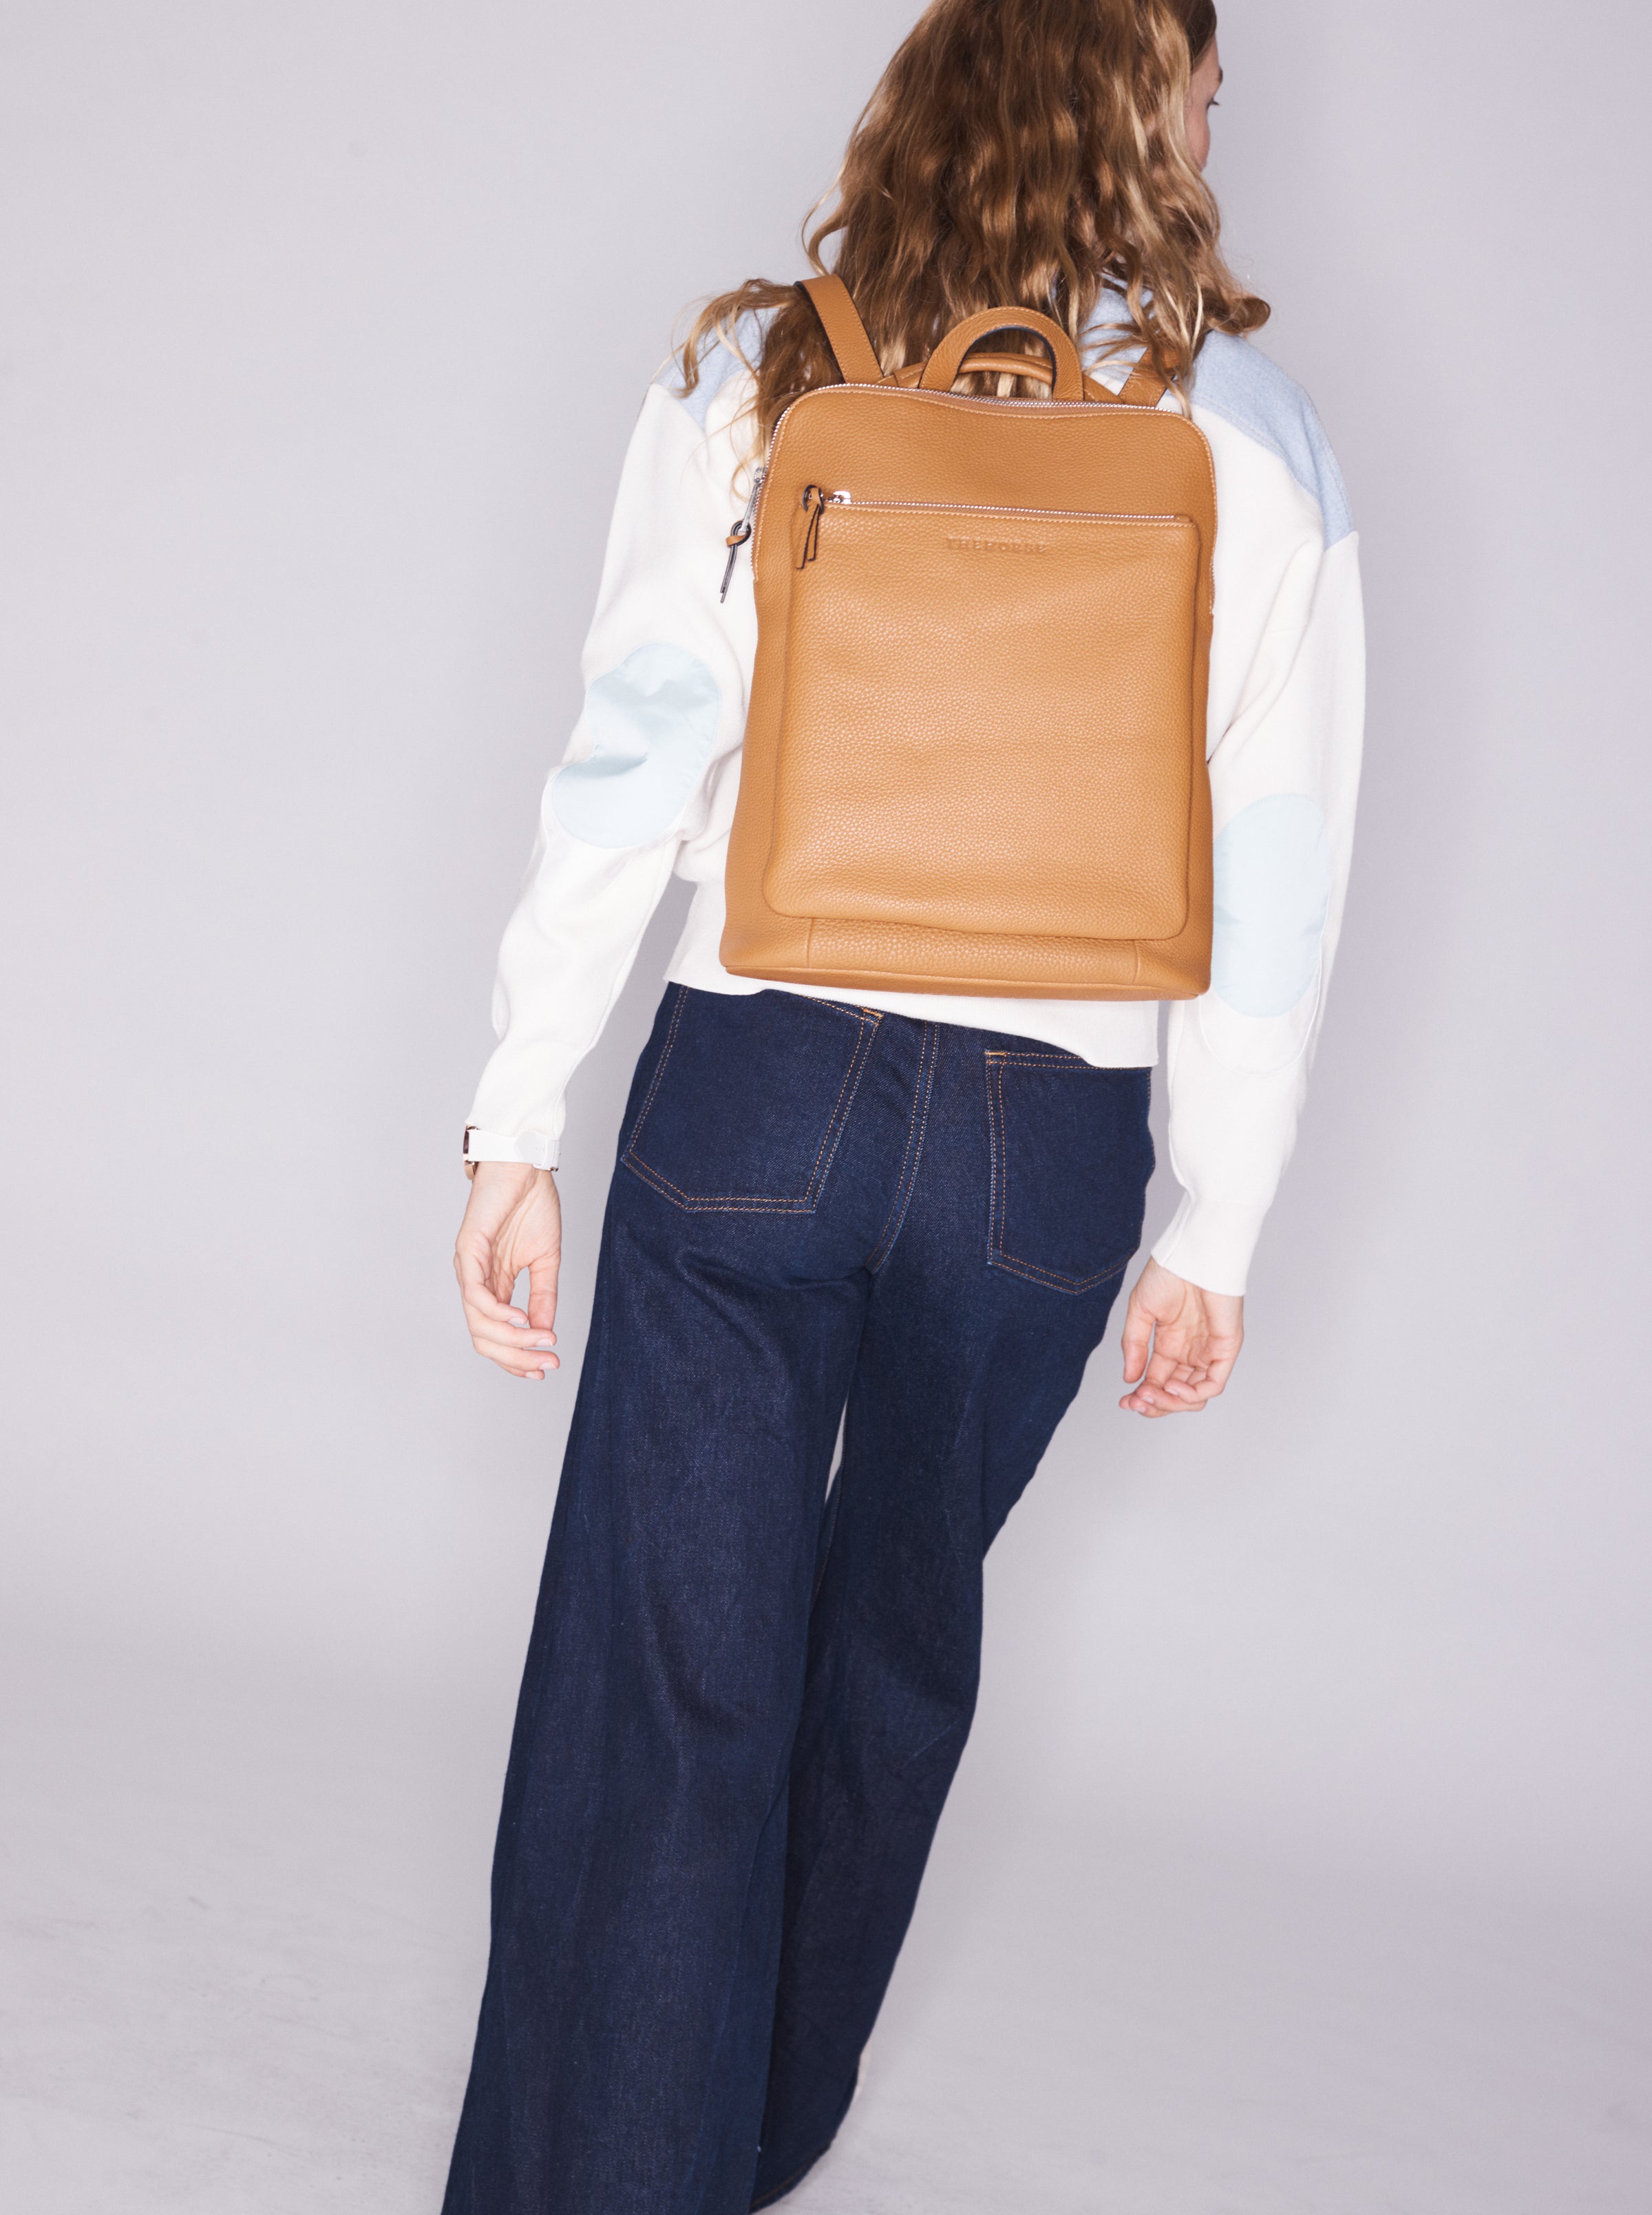 Backpack: Tan Pebbled Leather